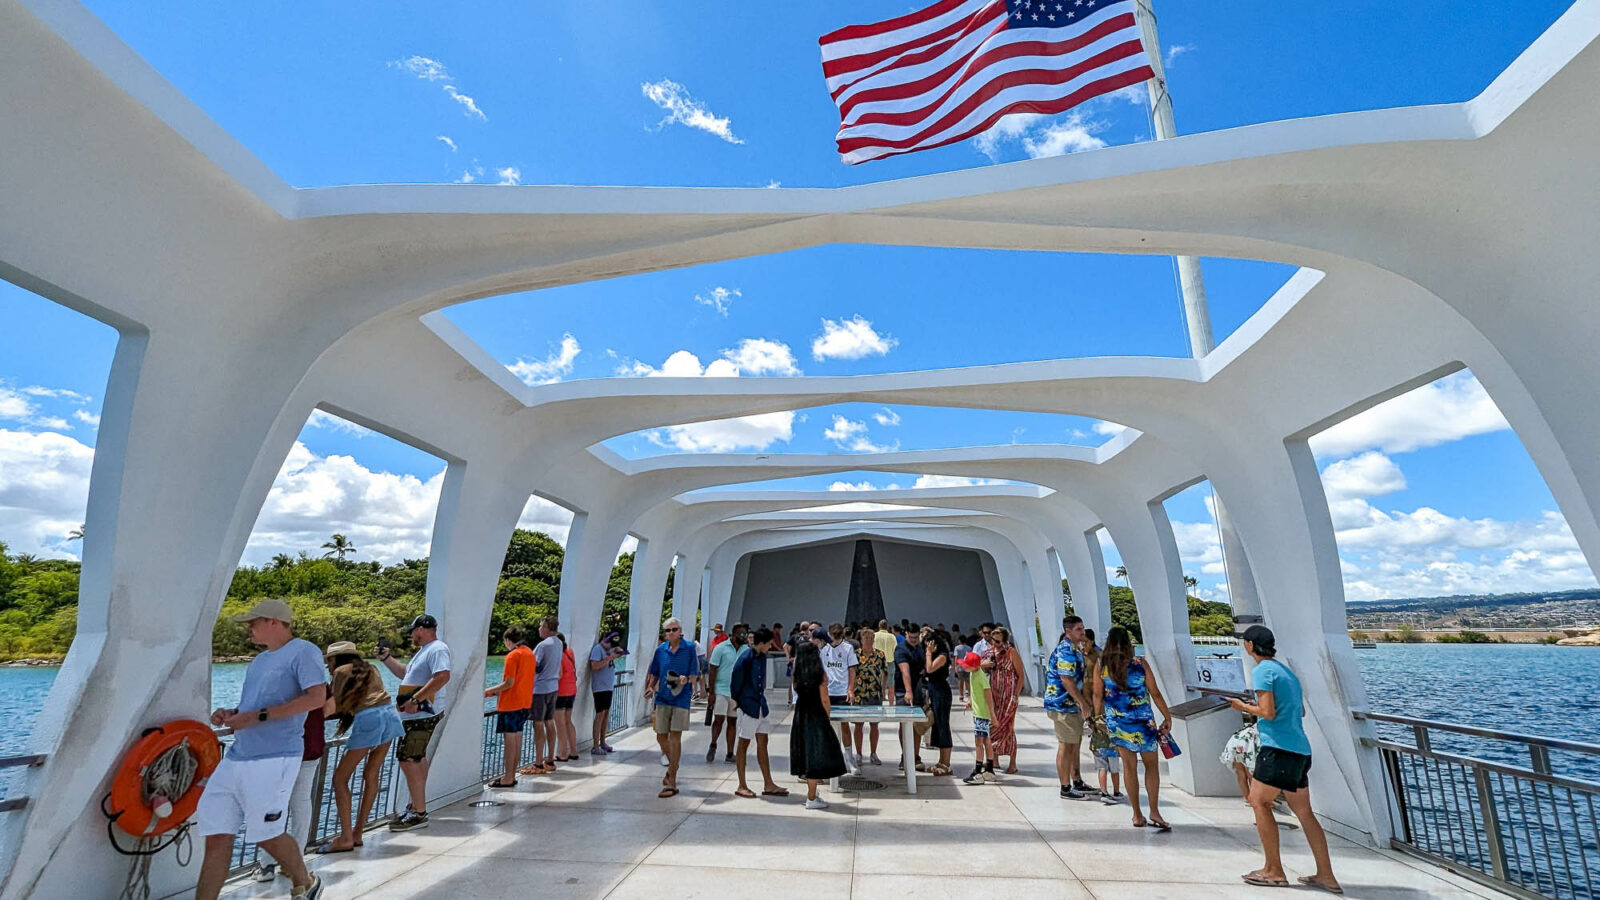 people on board a white memorial over the water under an american flag